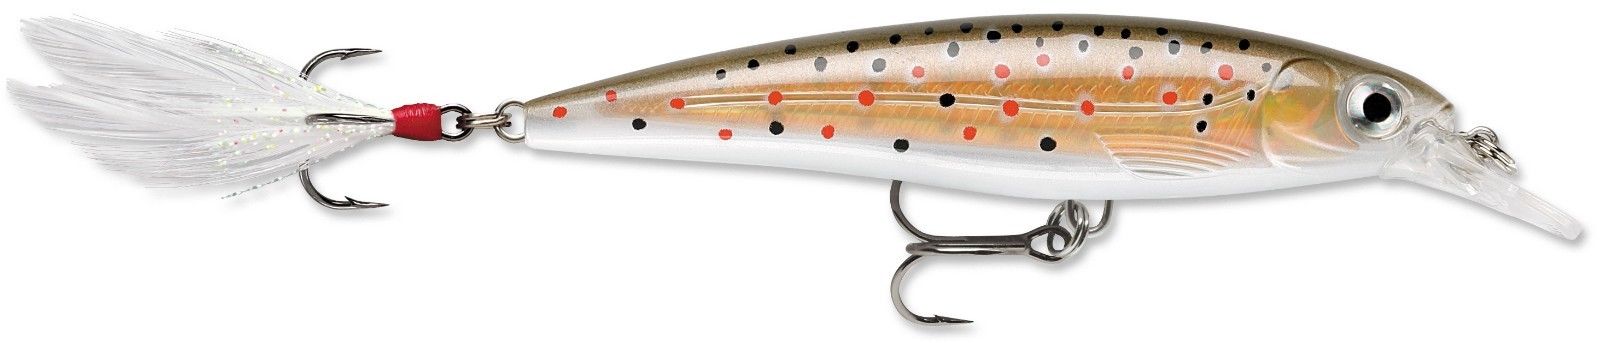 Rapala X Rap Shad Shallow 06 Fishing Lures on PopScreen